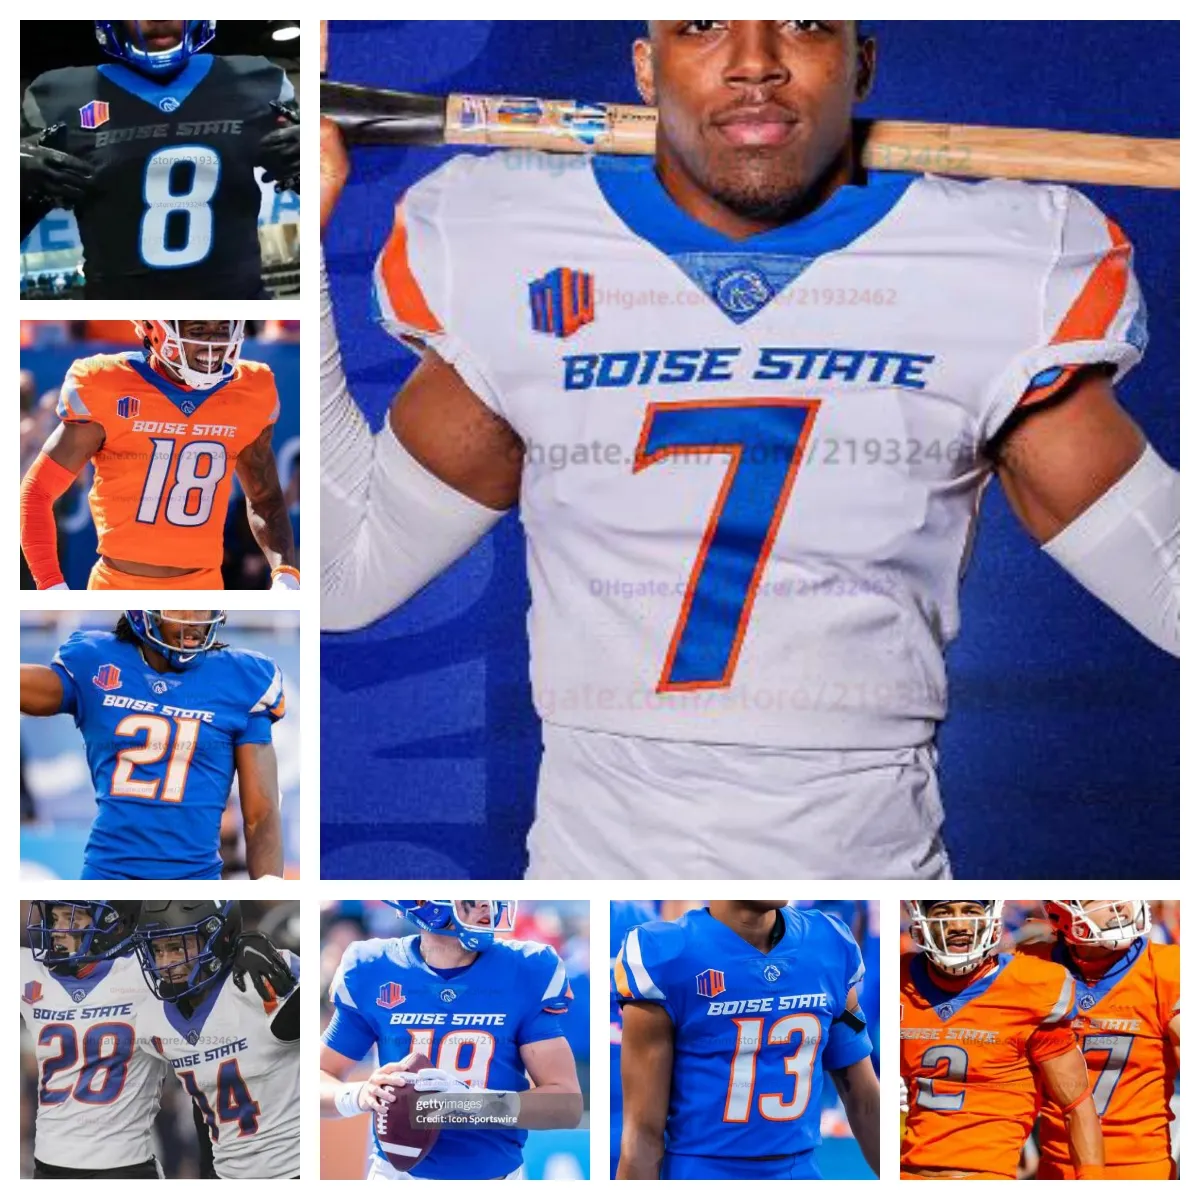 Maglia Boise State College Football NCAA Qualsiasi nome Numero Maglie uomo donna gioventù Colt Fulton Shea Whiting Chase Penry Stefan Cobbs Latrell Caples Ben Dooley